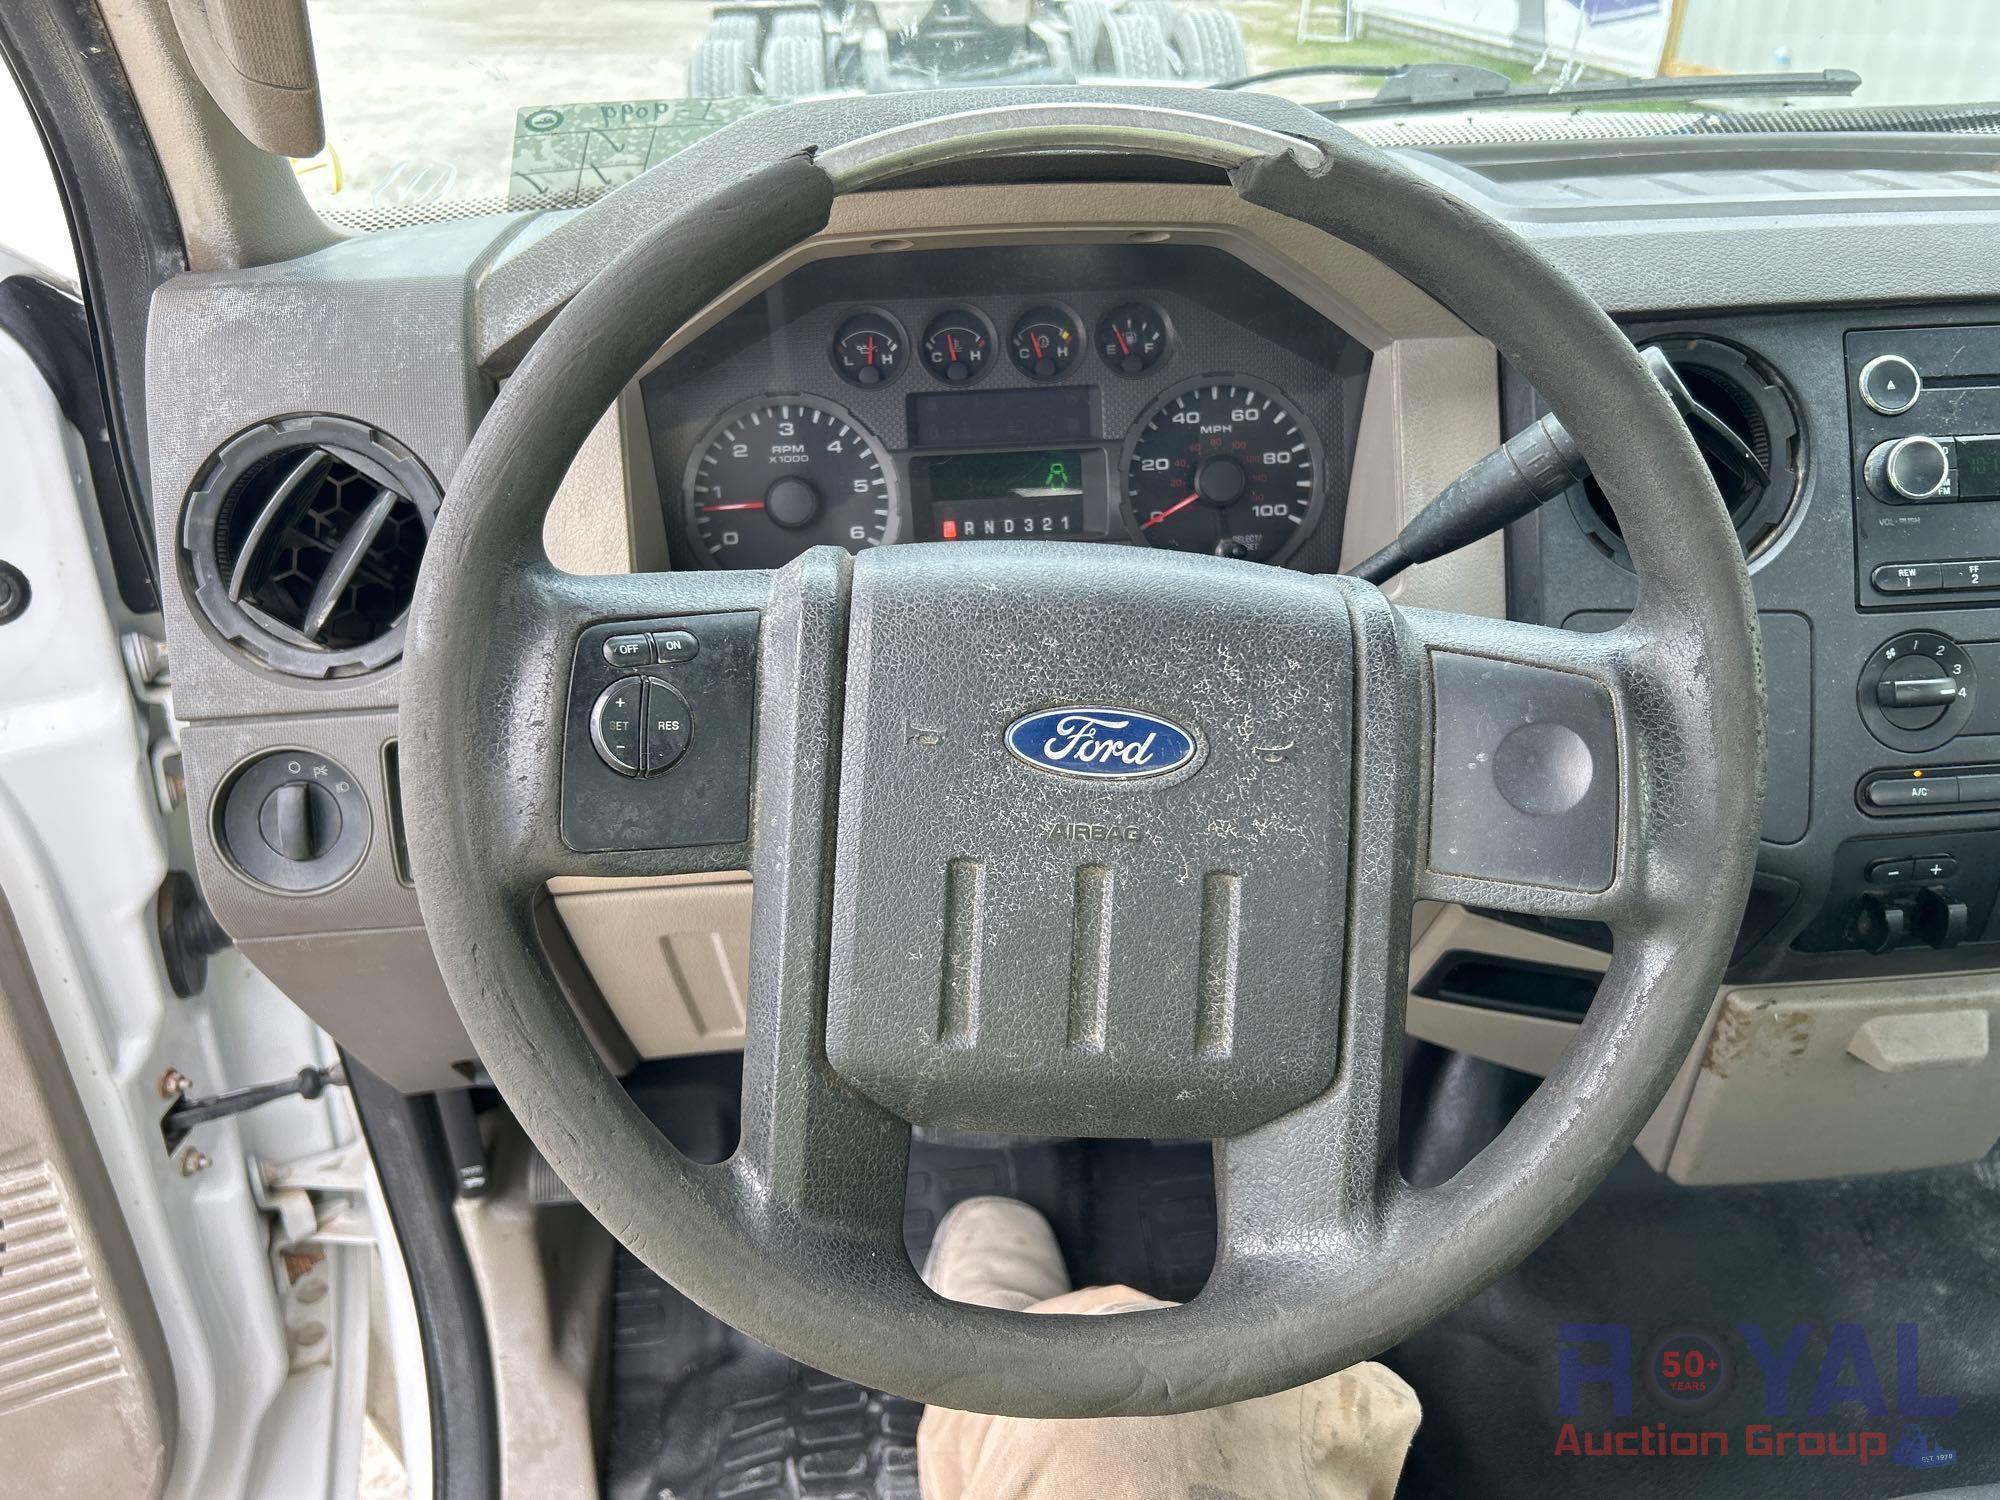 2009 Ford F350 Service Truck